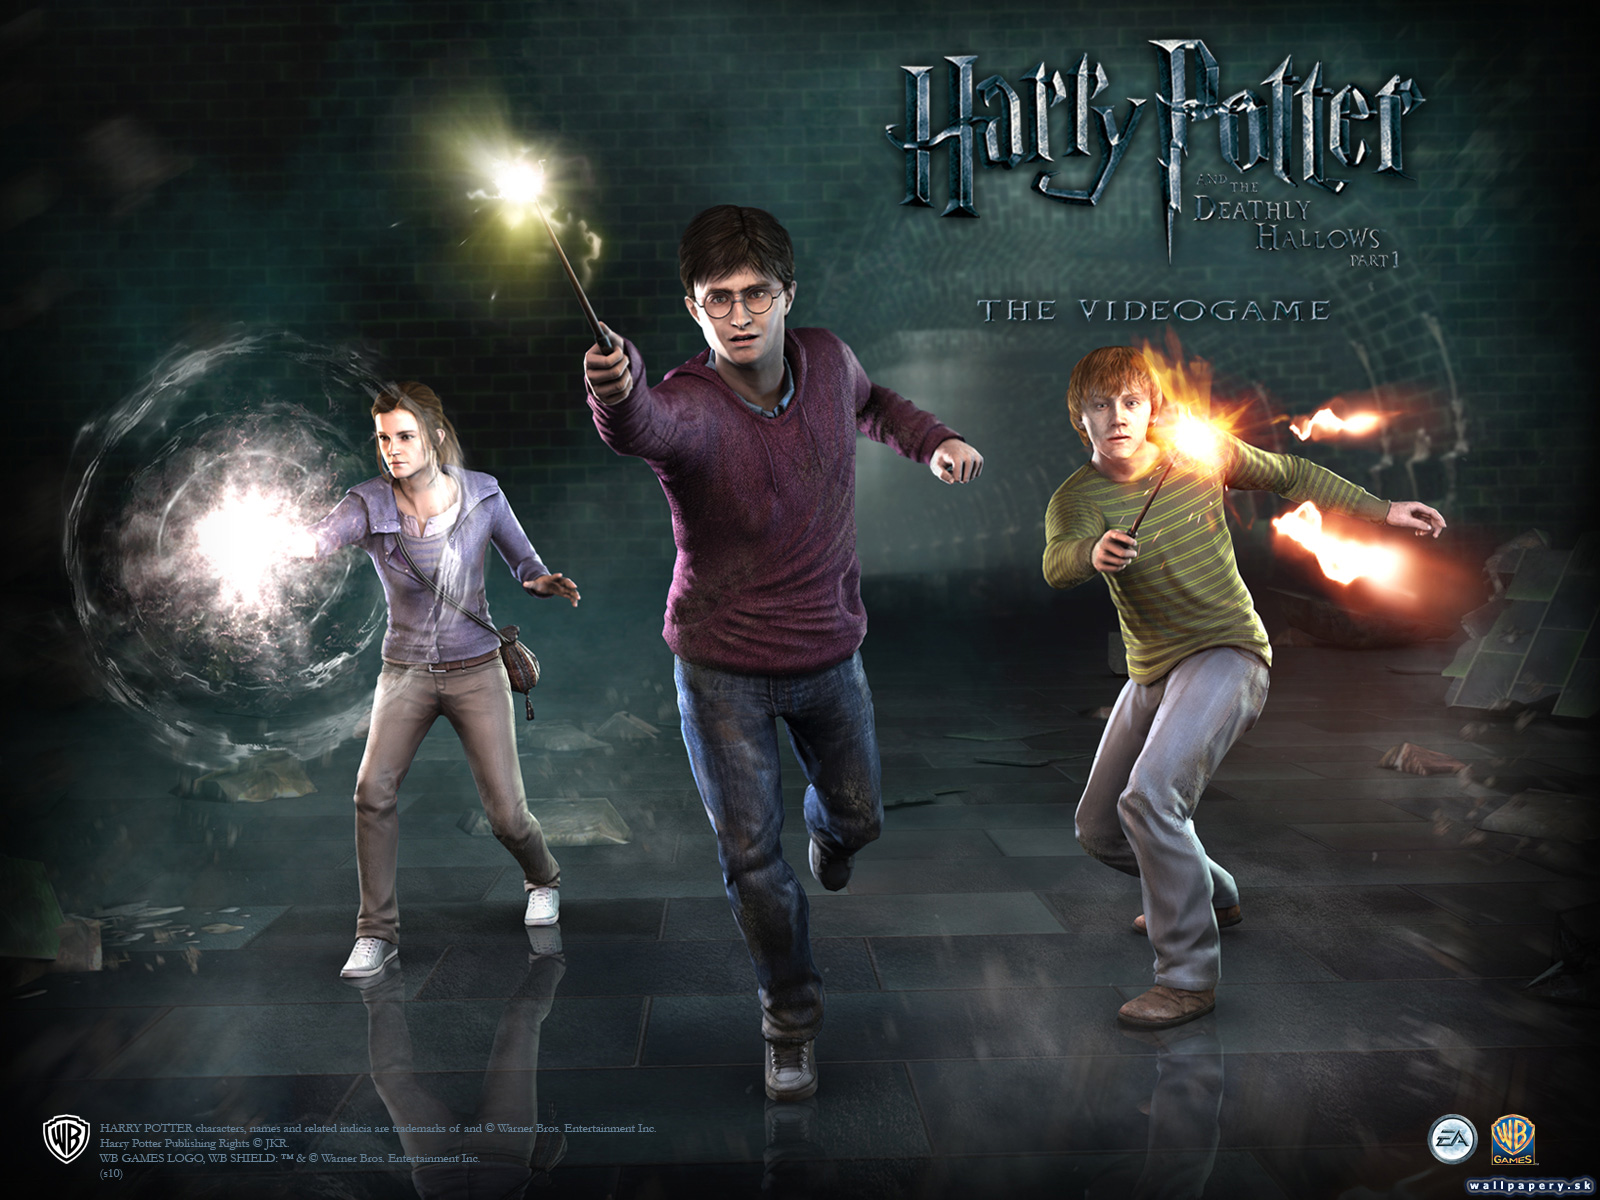 Harry Potter and the Deathly Hallows: Part 1 - wallpaper 6